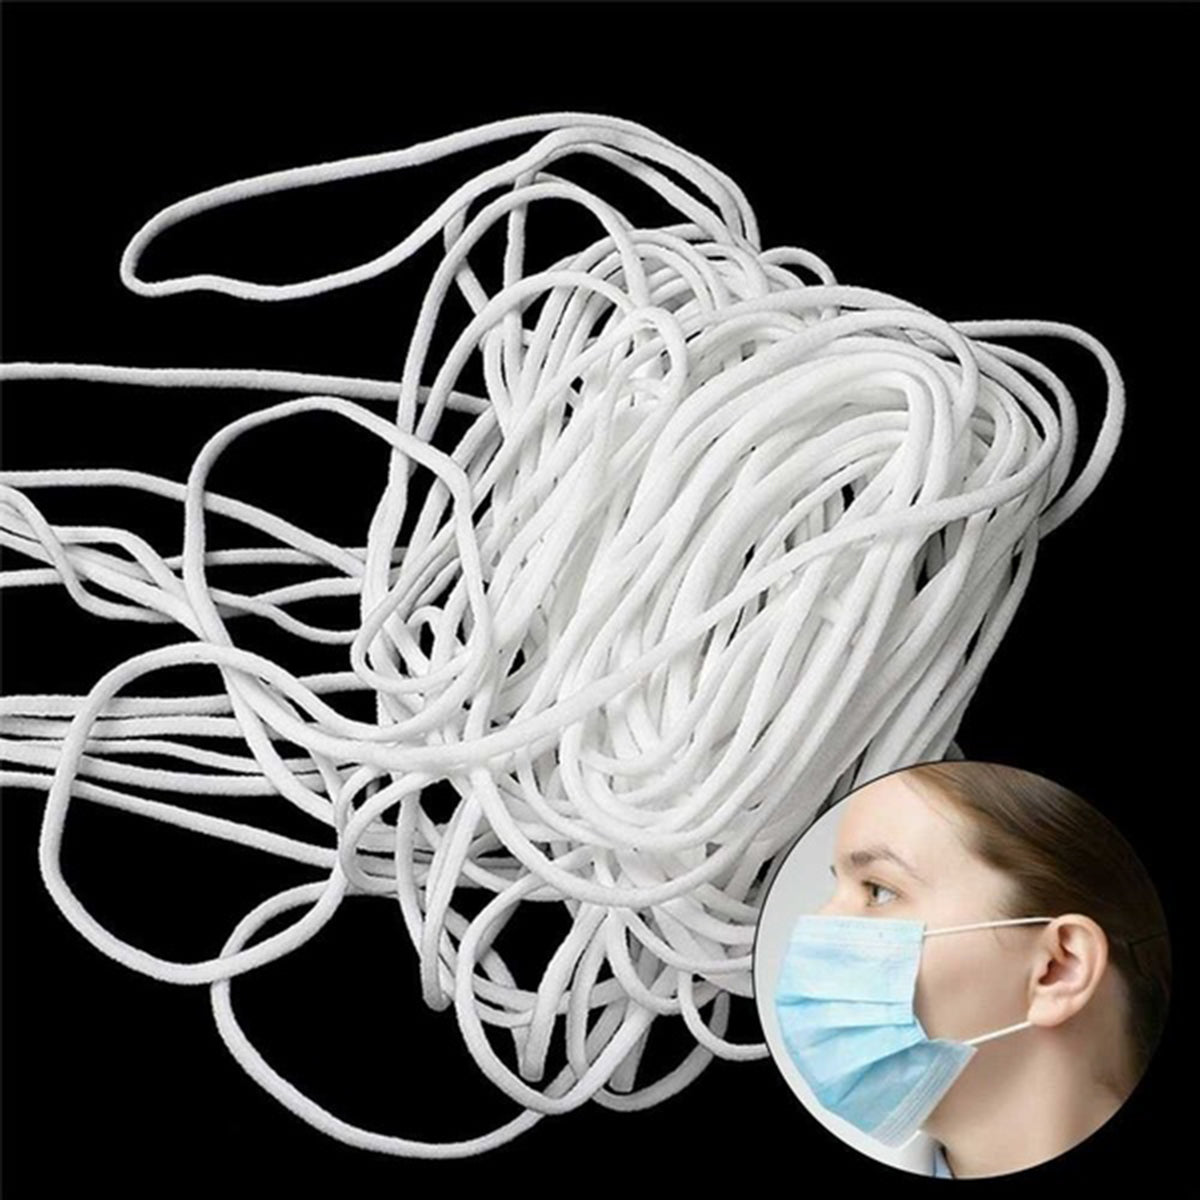 3mm Round Elastic Band Cord Rope Ear Hanging DIY Crafts Sewing 10/20/50m